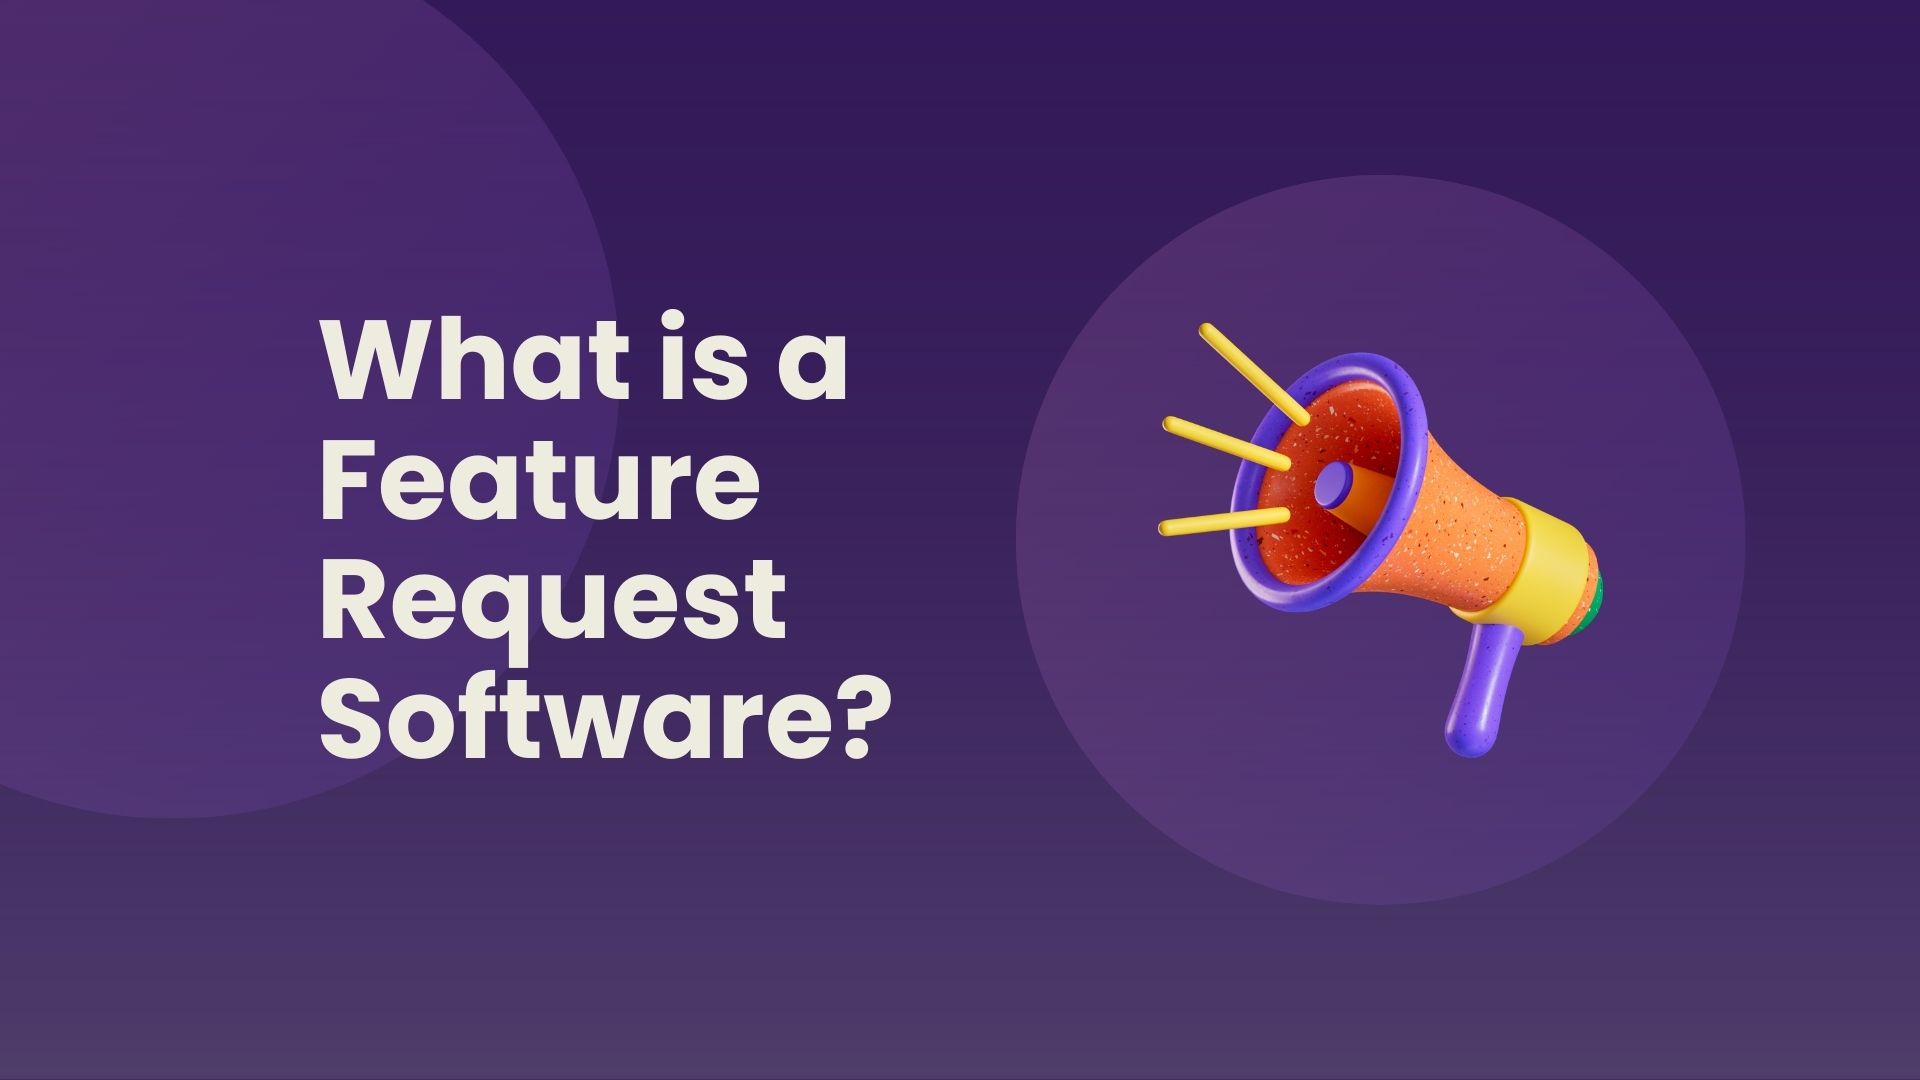 What is a feature request software?